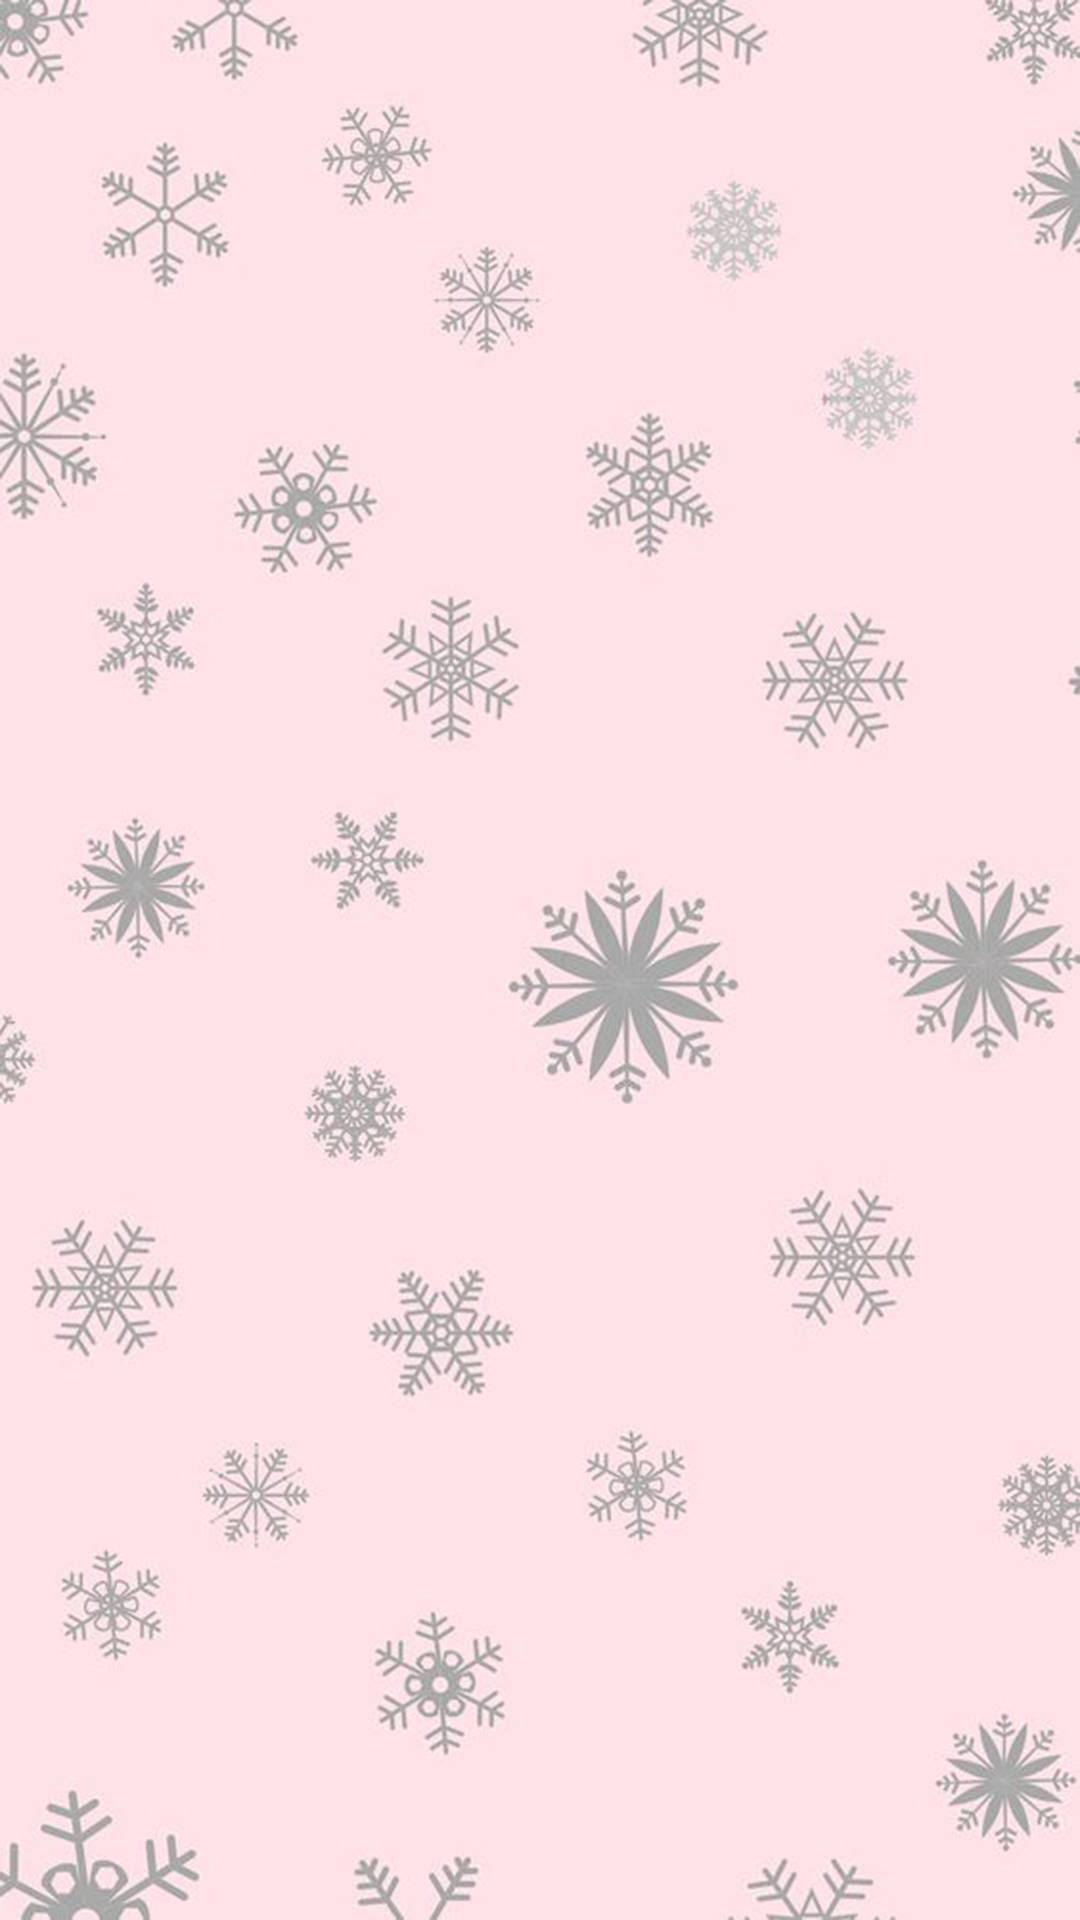 Instagram Story Winter Snowflakes Pattern Background